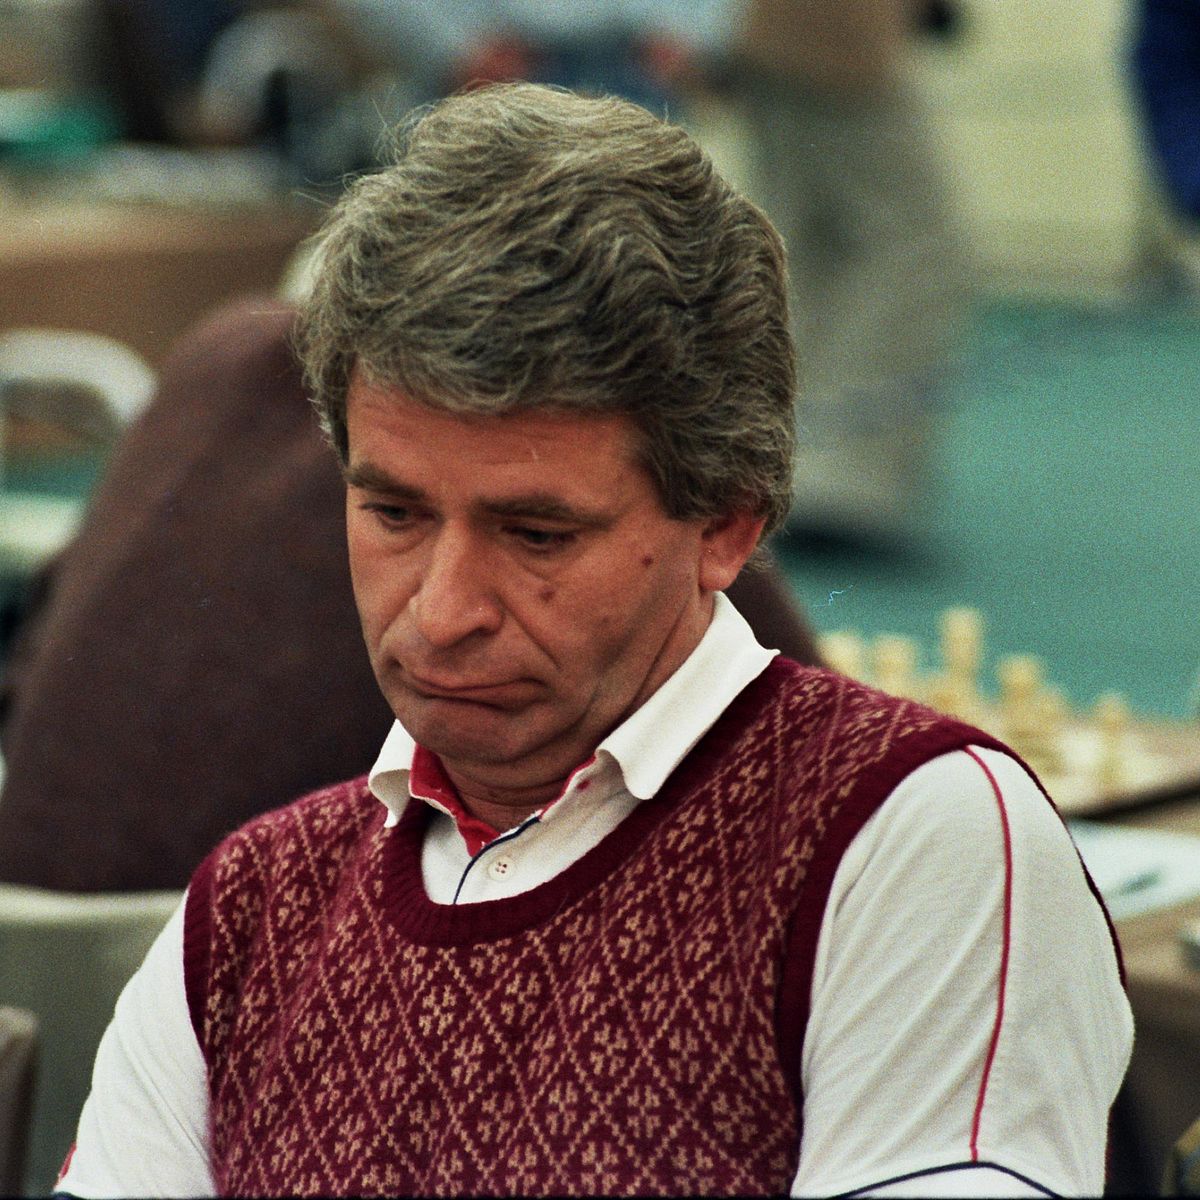 Jesse February on X: 1975, Fischer refused to defend his WC title against  Karpov due to his dispute over the match format. 1978, Karpov played his  first WC match, beating Korchnoi. 2023